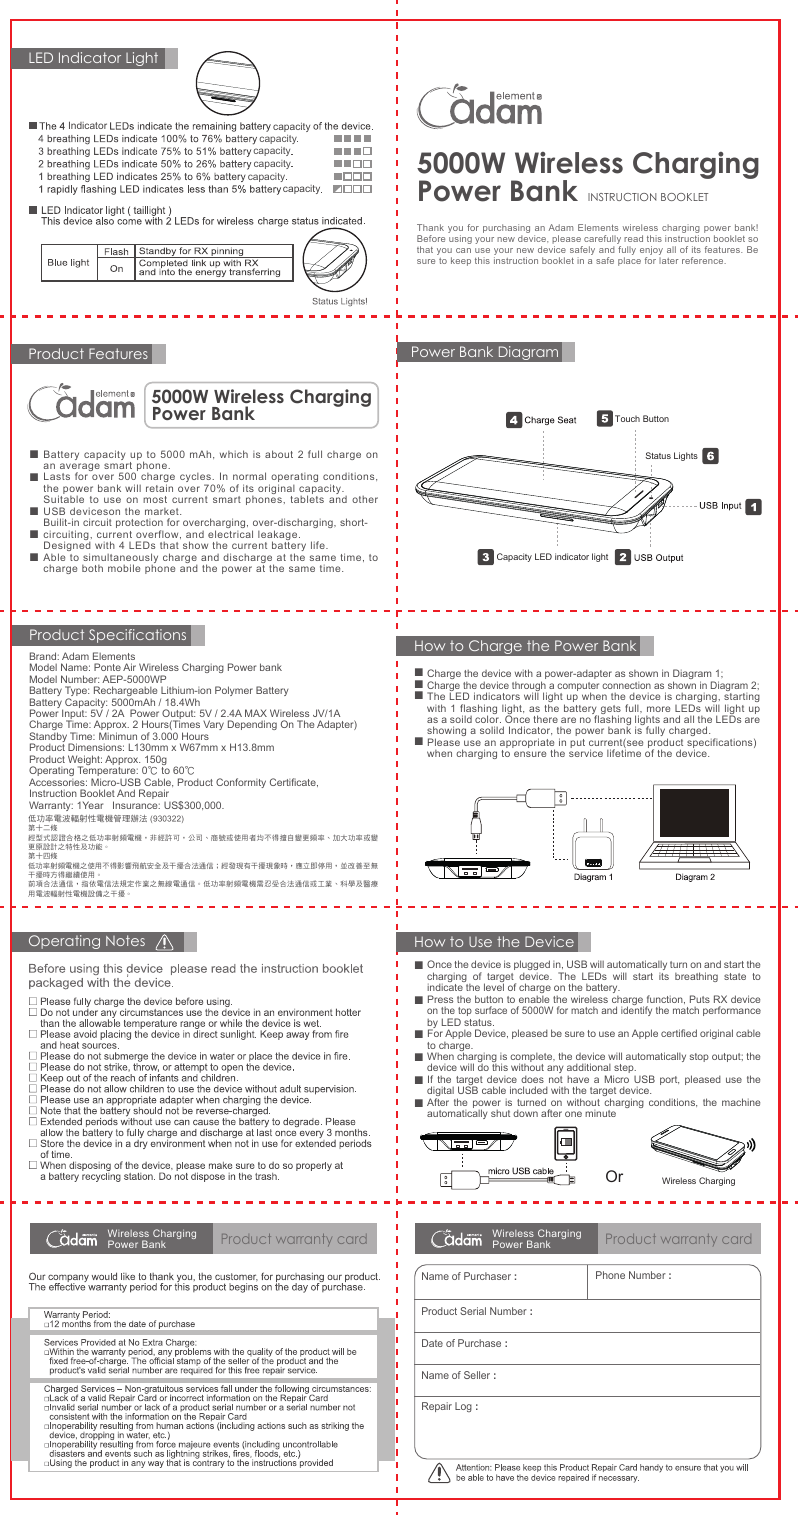 5000W Wireless Charging INSTRUCTION BOOKLETPower BankThank you for purchasing an Adam Elements wireless charging power bank! Before using your new device, please carefully read this instruction booklet so that you can use your new device safely and fully enjoy all of its features. Be sure to keep this instruction booklet in a safe place for later reference.Power Bank DiagramProduct FeaturesLED Indicator LightTouch ButtonCapacity LED indicator lightStatus LightsCharge the device with a power-adapter as shown in Diagram 1;Charge the device through a computer connection as shown in Diagram 2;The LED indicators will light up when the device is charging, starting with 1 flashing light, as the battery gets full, more LEDs will light up as a soild color. Once there are no flashing lights and all the LEDs are showing a solild Indicator, the power bank is fully charged.Please use an appropriate in put current(see product specifications)when charging to ensure the service lifetime of the device.■■■■■■■■■How to Charge the Power BankHow to Use the DeviceOnce the device is plugged in, USB will automatically turn on and start the charging of target device. The LEDs will start its breathing state to indicate the level of charge on the battery.Press the button to enable the wireless charge function, Puts RX device on the top surface of 5000W for match and identify the match performance by LED status.For Apple Device, pleased be sure to use an Apple certified original cable to charge.When charging is complete, the device will automatically stop output; the device will do this without any additional step.If the target device does not have a Micro USB port, pleased use the digital USB cable included with the target device.After the power is turned on without charging conditions, the machine automatically shut down after one minute■■■■■■Or Wireless ChargingWireless ChargingPower BankProduct warranty cardWireless ChargingPower BankProduct warranty cardOperating NotesProduct SpecificationsBrand: Adam ElementsModel Name: Ponte Air Wireless Charging Power bankModel Number: AEP-5000WPBattery Type: Rechargeable Lithium-ion Polymer Battery  Battery Capacity: 5000mAh / 18.4WhPower Input: 5V / 2A  Power Output: 5V / 2.4A MAX Wireless JV/1A  Charge Time: Approx. 2 Hours(Times Vary Depending On The Adapter)Standby Time: Minimun of 3.000 HoursProduct Dimensions: L130mm x W67mm x H13.8mmProduct Weight: Approx. 150gOperating Temperature: 0℃ to 60℃Accessories: Micro-USB Cable, Product Conformity Certificate, Instruction Booklet And Repair Warranty: 1Year   Insurance: US$300,000.低功率電波輻射性電機管理辦法 (930322)第十二條經型式認證合格之低功率射頻電機，非經許可，公司、商號或使用者均不得擅自變更頻率、加大功率或變更原設計之特性及功能。第十四條低功率射頻電機之使用不得影響飛航安全及干擾合法通信；經發現有干擾現象時，應立即停用，並改善至無干擾時方得繼續使用。前項合法通信，指依電信法規定作業之無線電通信。低功率射頻電機需忍受合法通信或工業、科學及醫療用電波輻射性電機設備之干擾。5000W Wireless Charging Power BankBattery capacity up to 5000 mAh, which is about 2 full charge on an average smart phone.Lasts for over 500 charge cycles. In normal operating conditions, the power bank will retain over 70% of its original capacity.Suitable to use on most current smart phones, tablets and other USB deviceson the market.Builit-in circuit protection for overcharging, over-discharging, short-circuiting, current overflow, and electrical leakage.Designed with 4 LEDs that show the current battery life.Able to simultaneously charge and discharge at the same time, to charge both mobile phone and the power at the same time.capacityIndicatorcapacitycapacitycapacitycapacitycapacityName of Purchaser :Phone Number :Product Serial Number :Date of Purchase :Name of Seller :Repair Log :